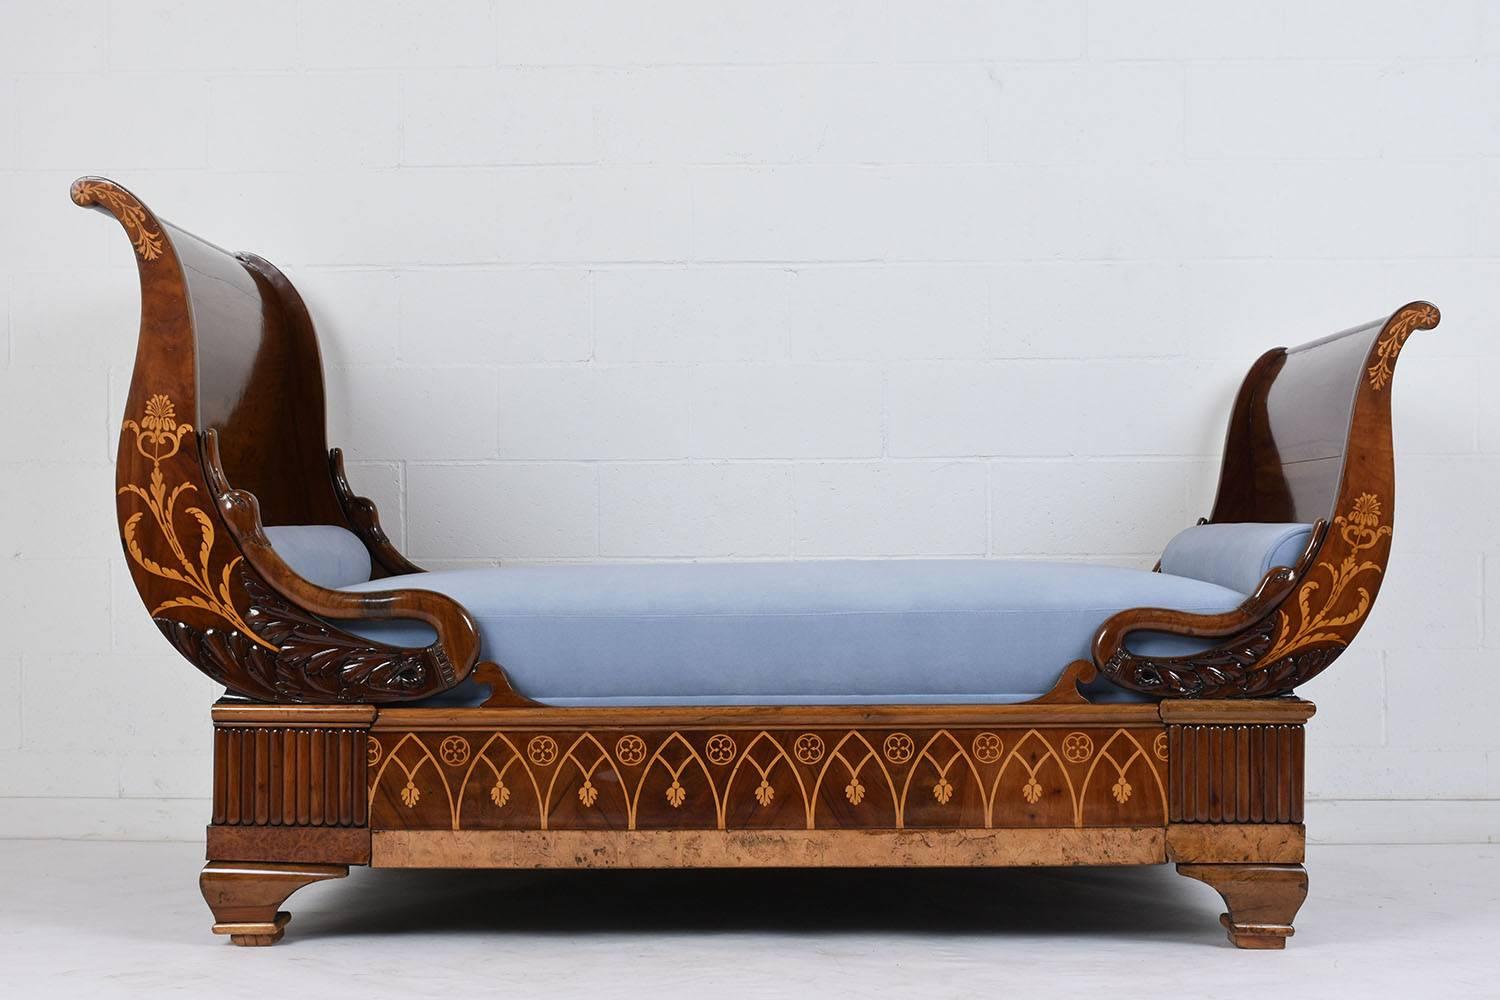 This 1850s French Empire-style daybed features a wood frame stained in a fruitwood color with a lacquered finish. The sleigh-style frame features intricate inlaid details on the headboard and footboard of flowers, leaves and Gothic motifs. The